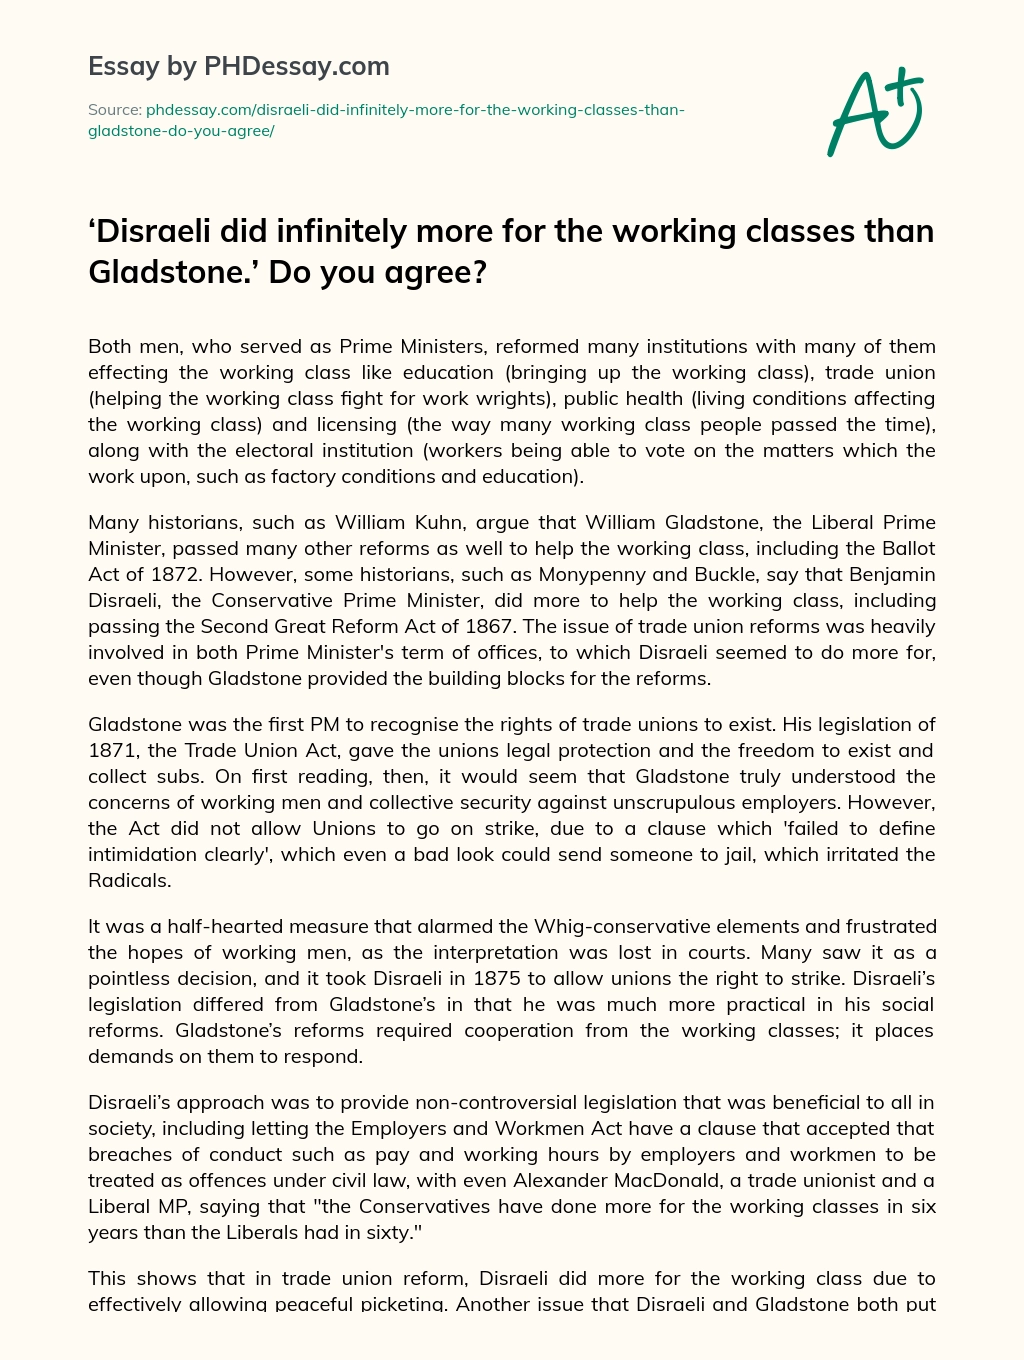 Disraeli did infinitely more for the working classes than Gladstone. Do you agree essay